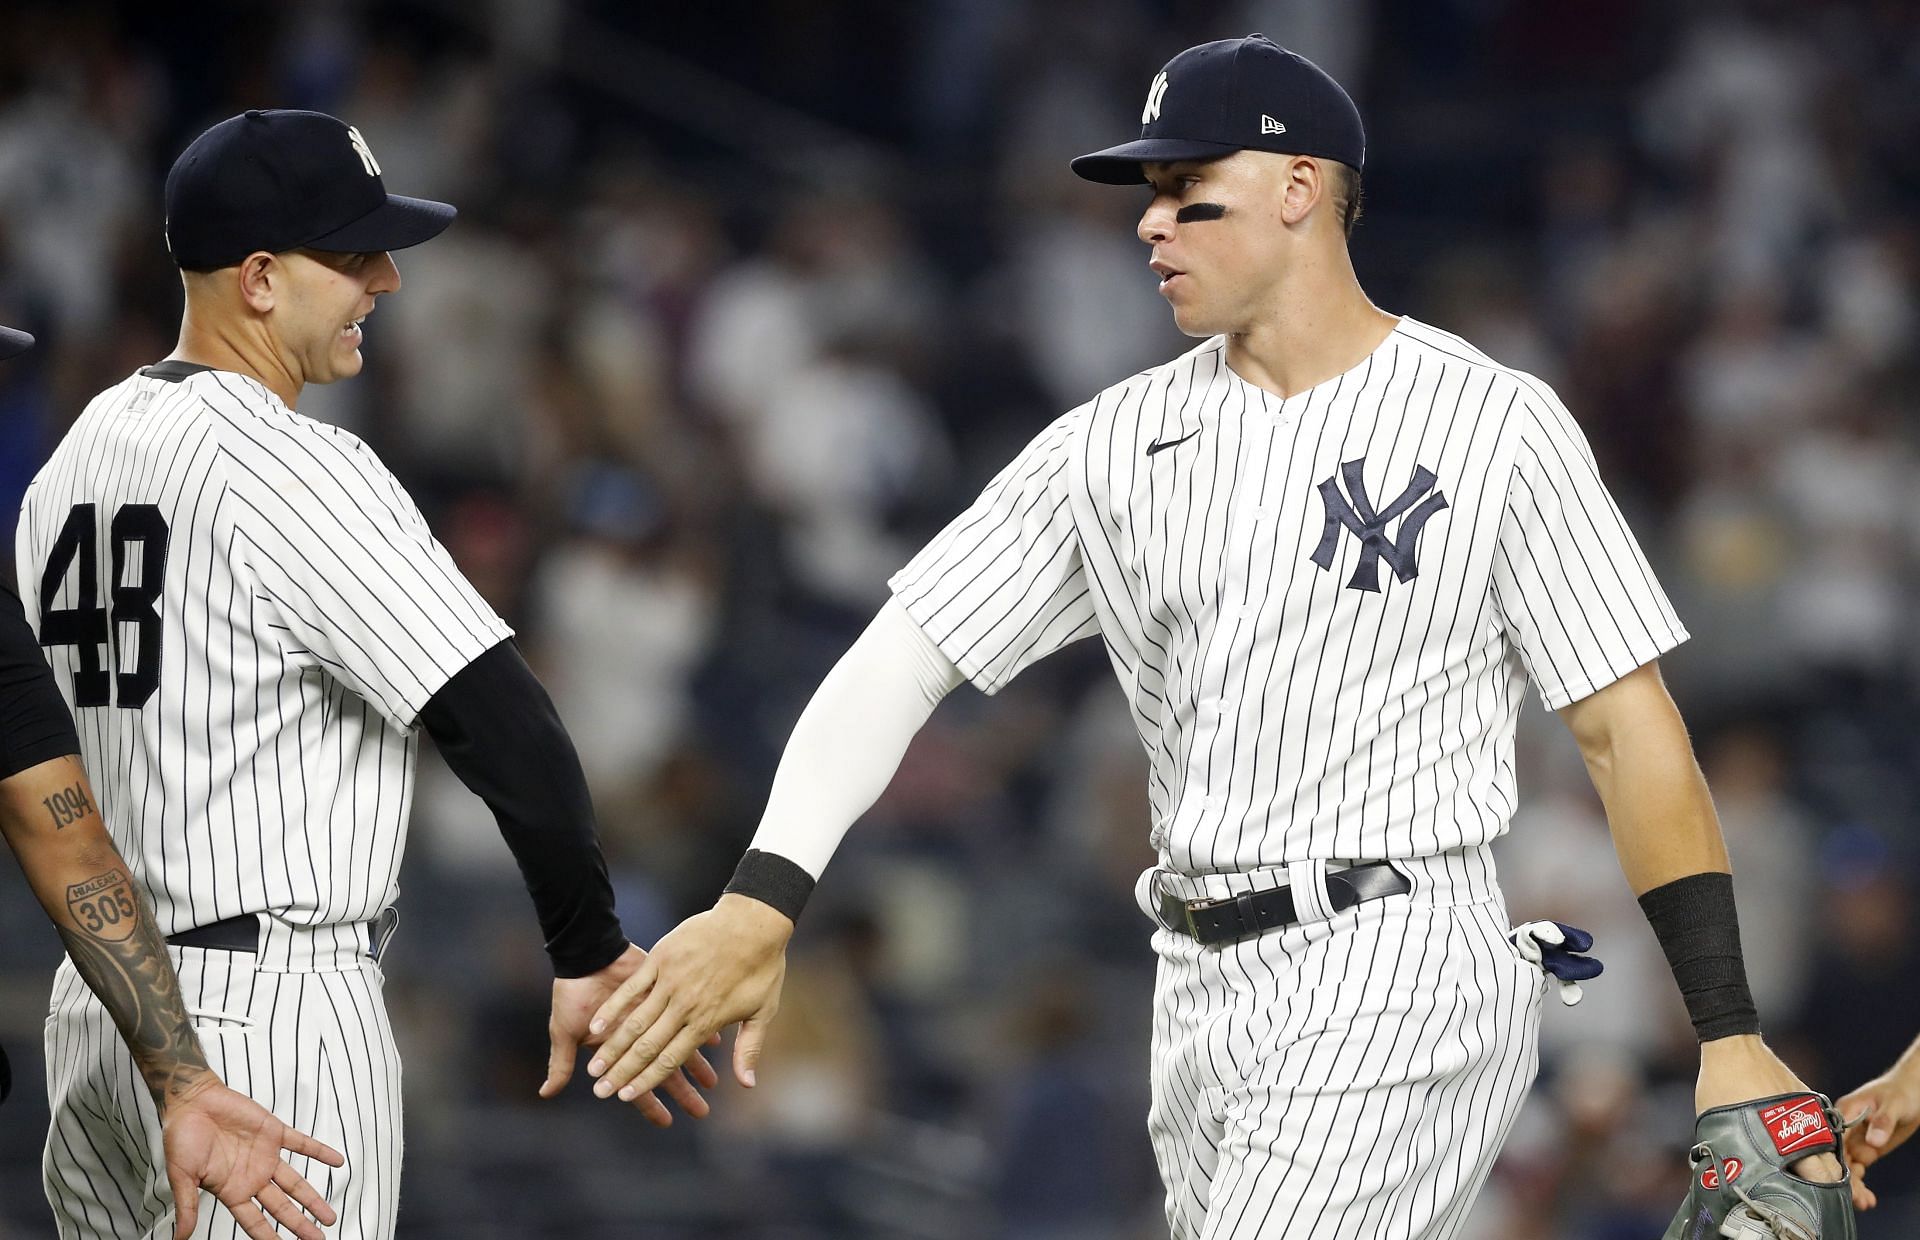 Yankees slugger Aaron Judge faces live pitching for the first time